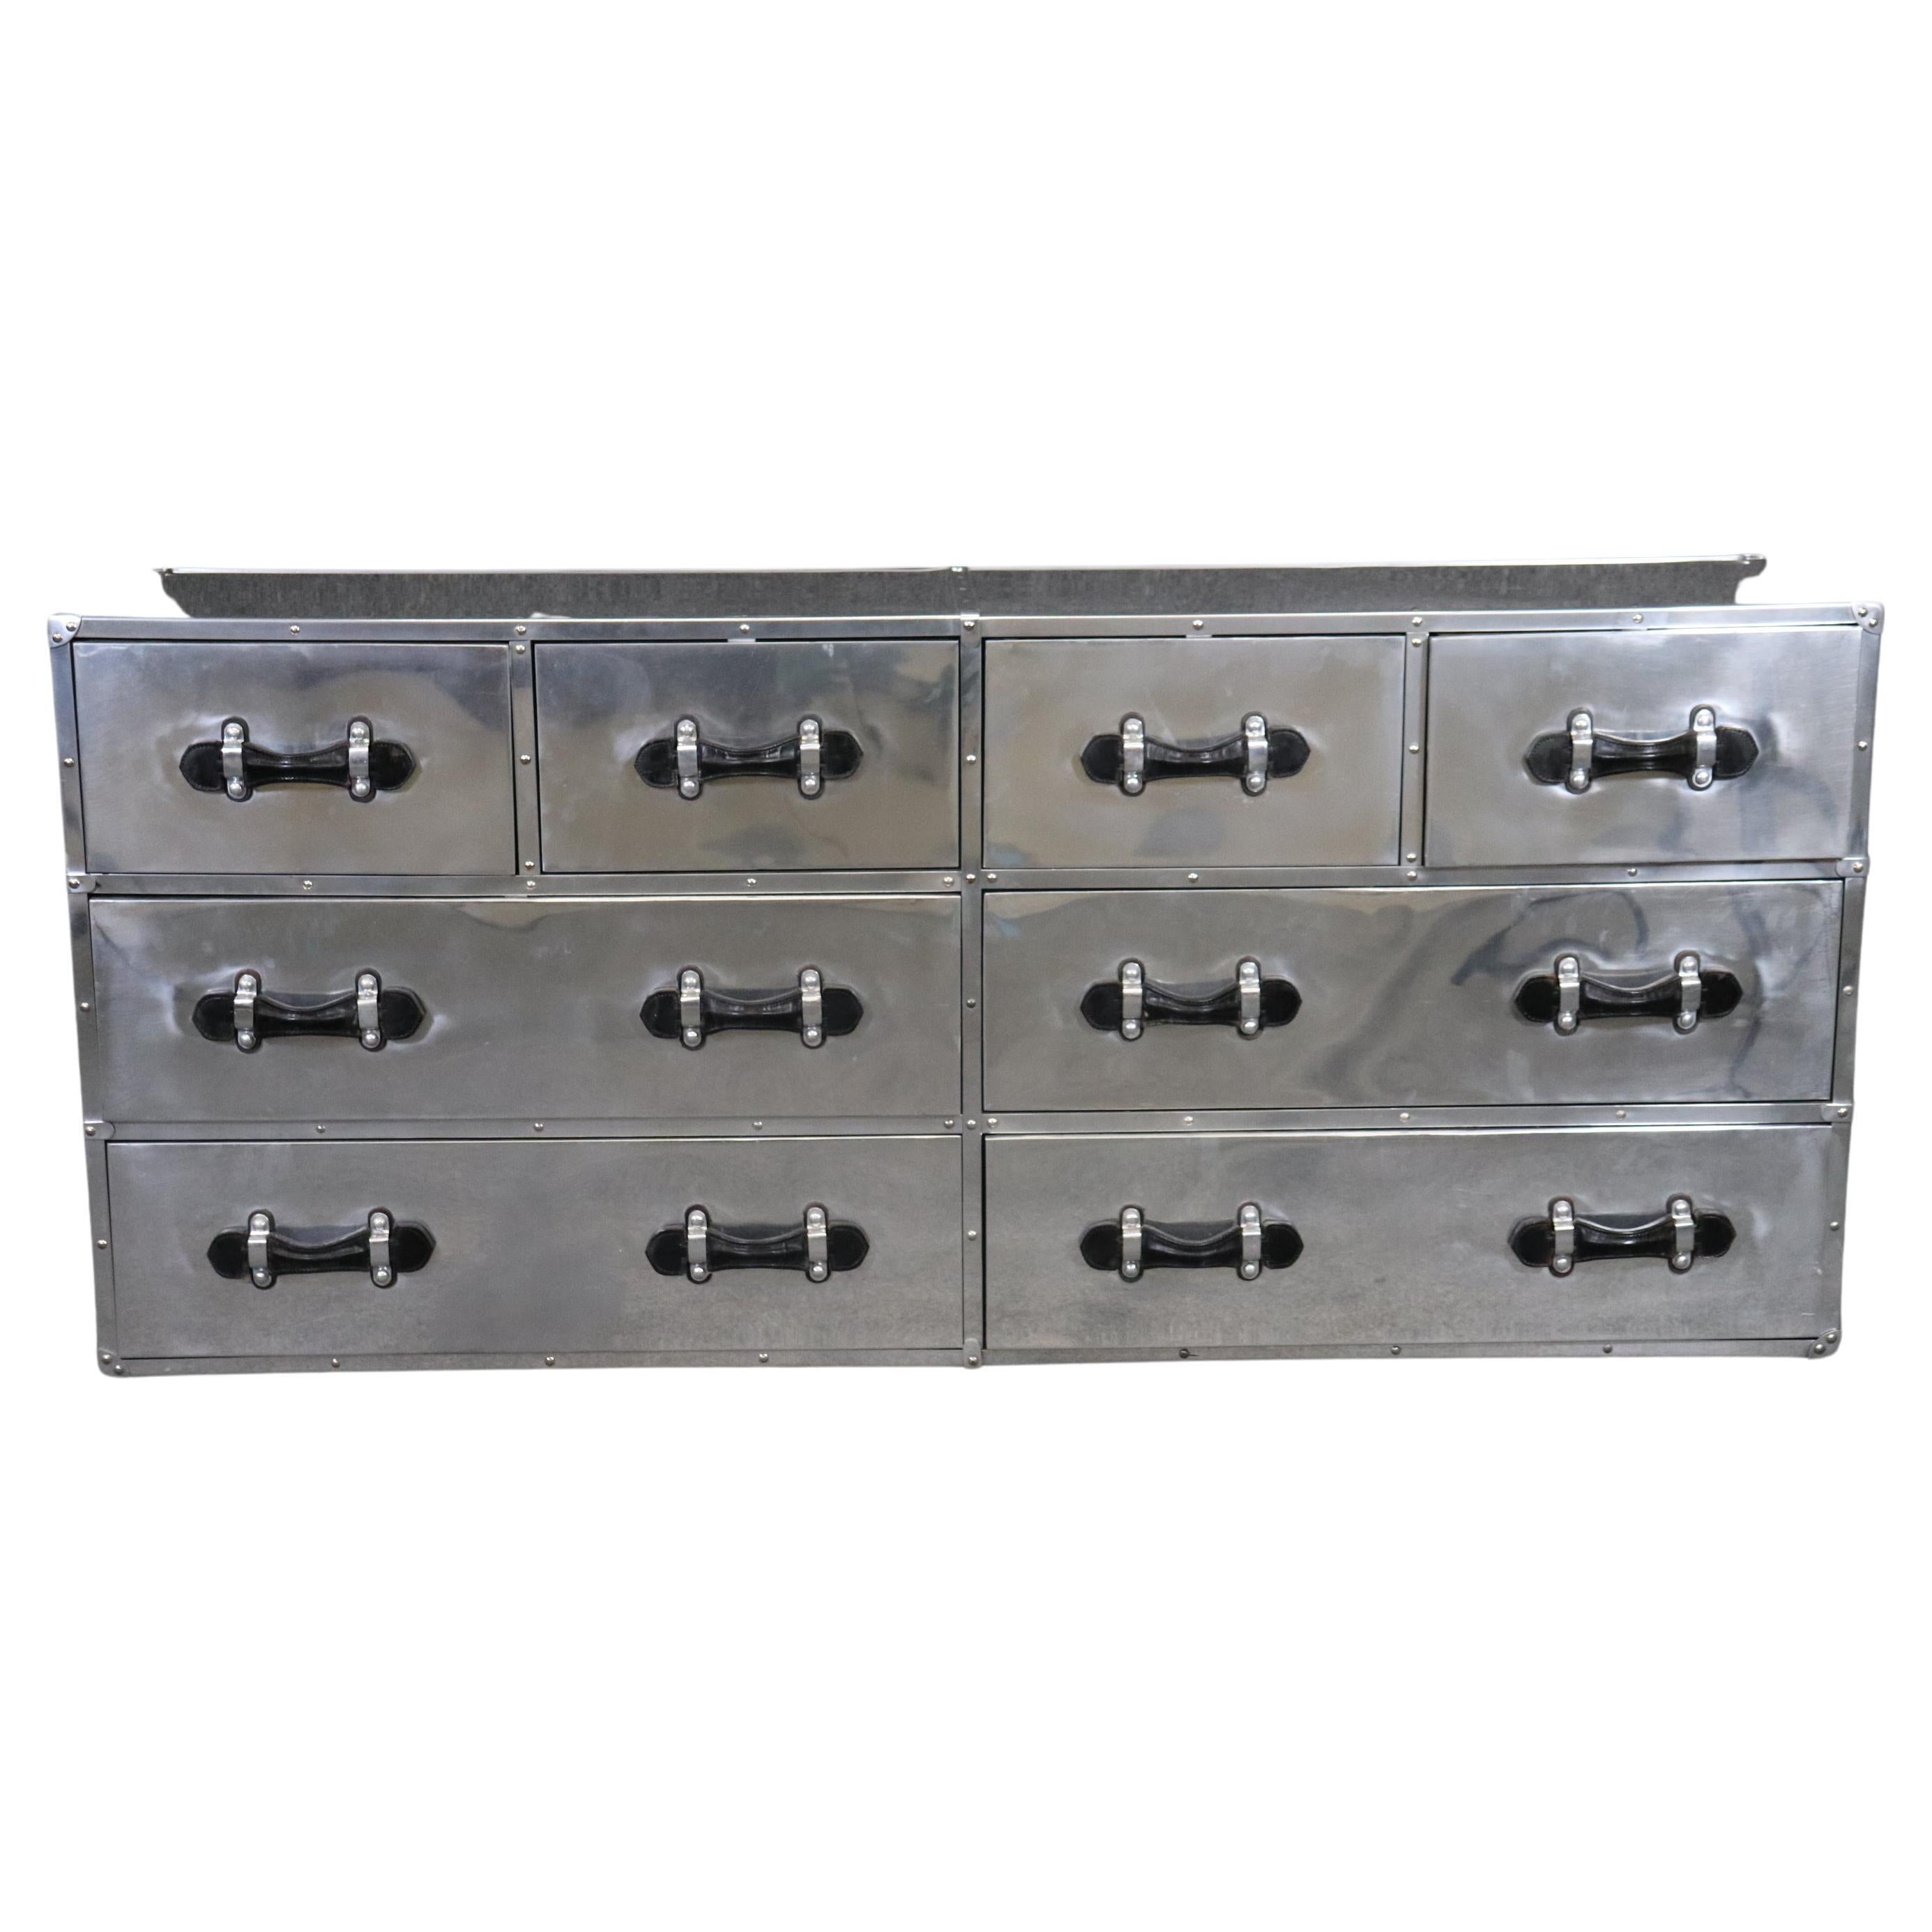 Dimensions- H: 31 1/2in W: 71in D: 20 1/2in
This Mid-Century Modern Restoration Hardware Style 8 Drawer Chrome Campaign Dresser, Chest of Drawers, MCM Furniture, MCM Dresser is truly fabulous and was made with quality in mind! This chest although